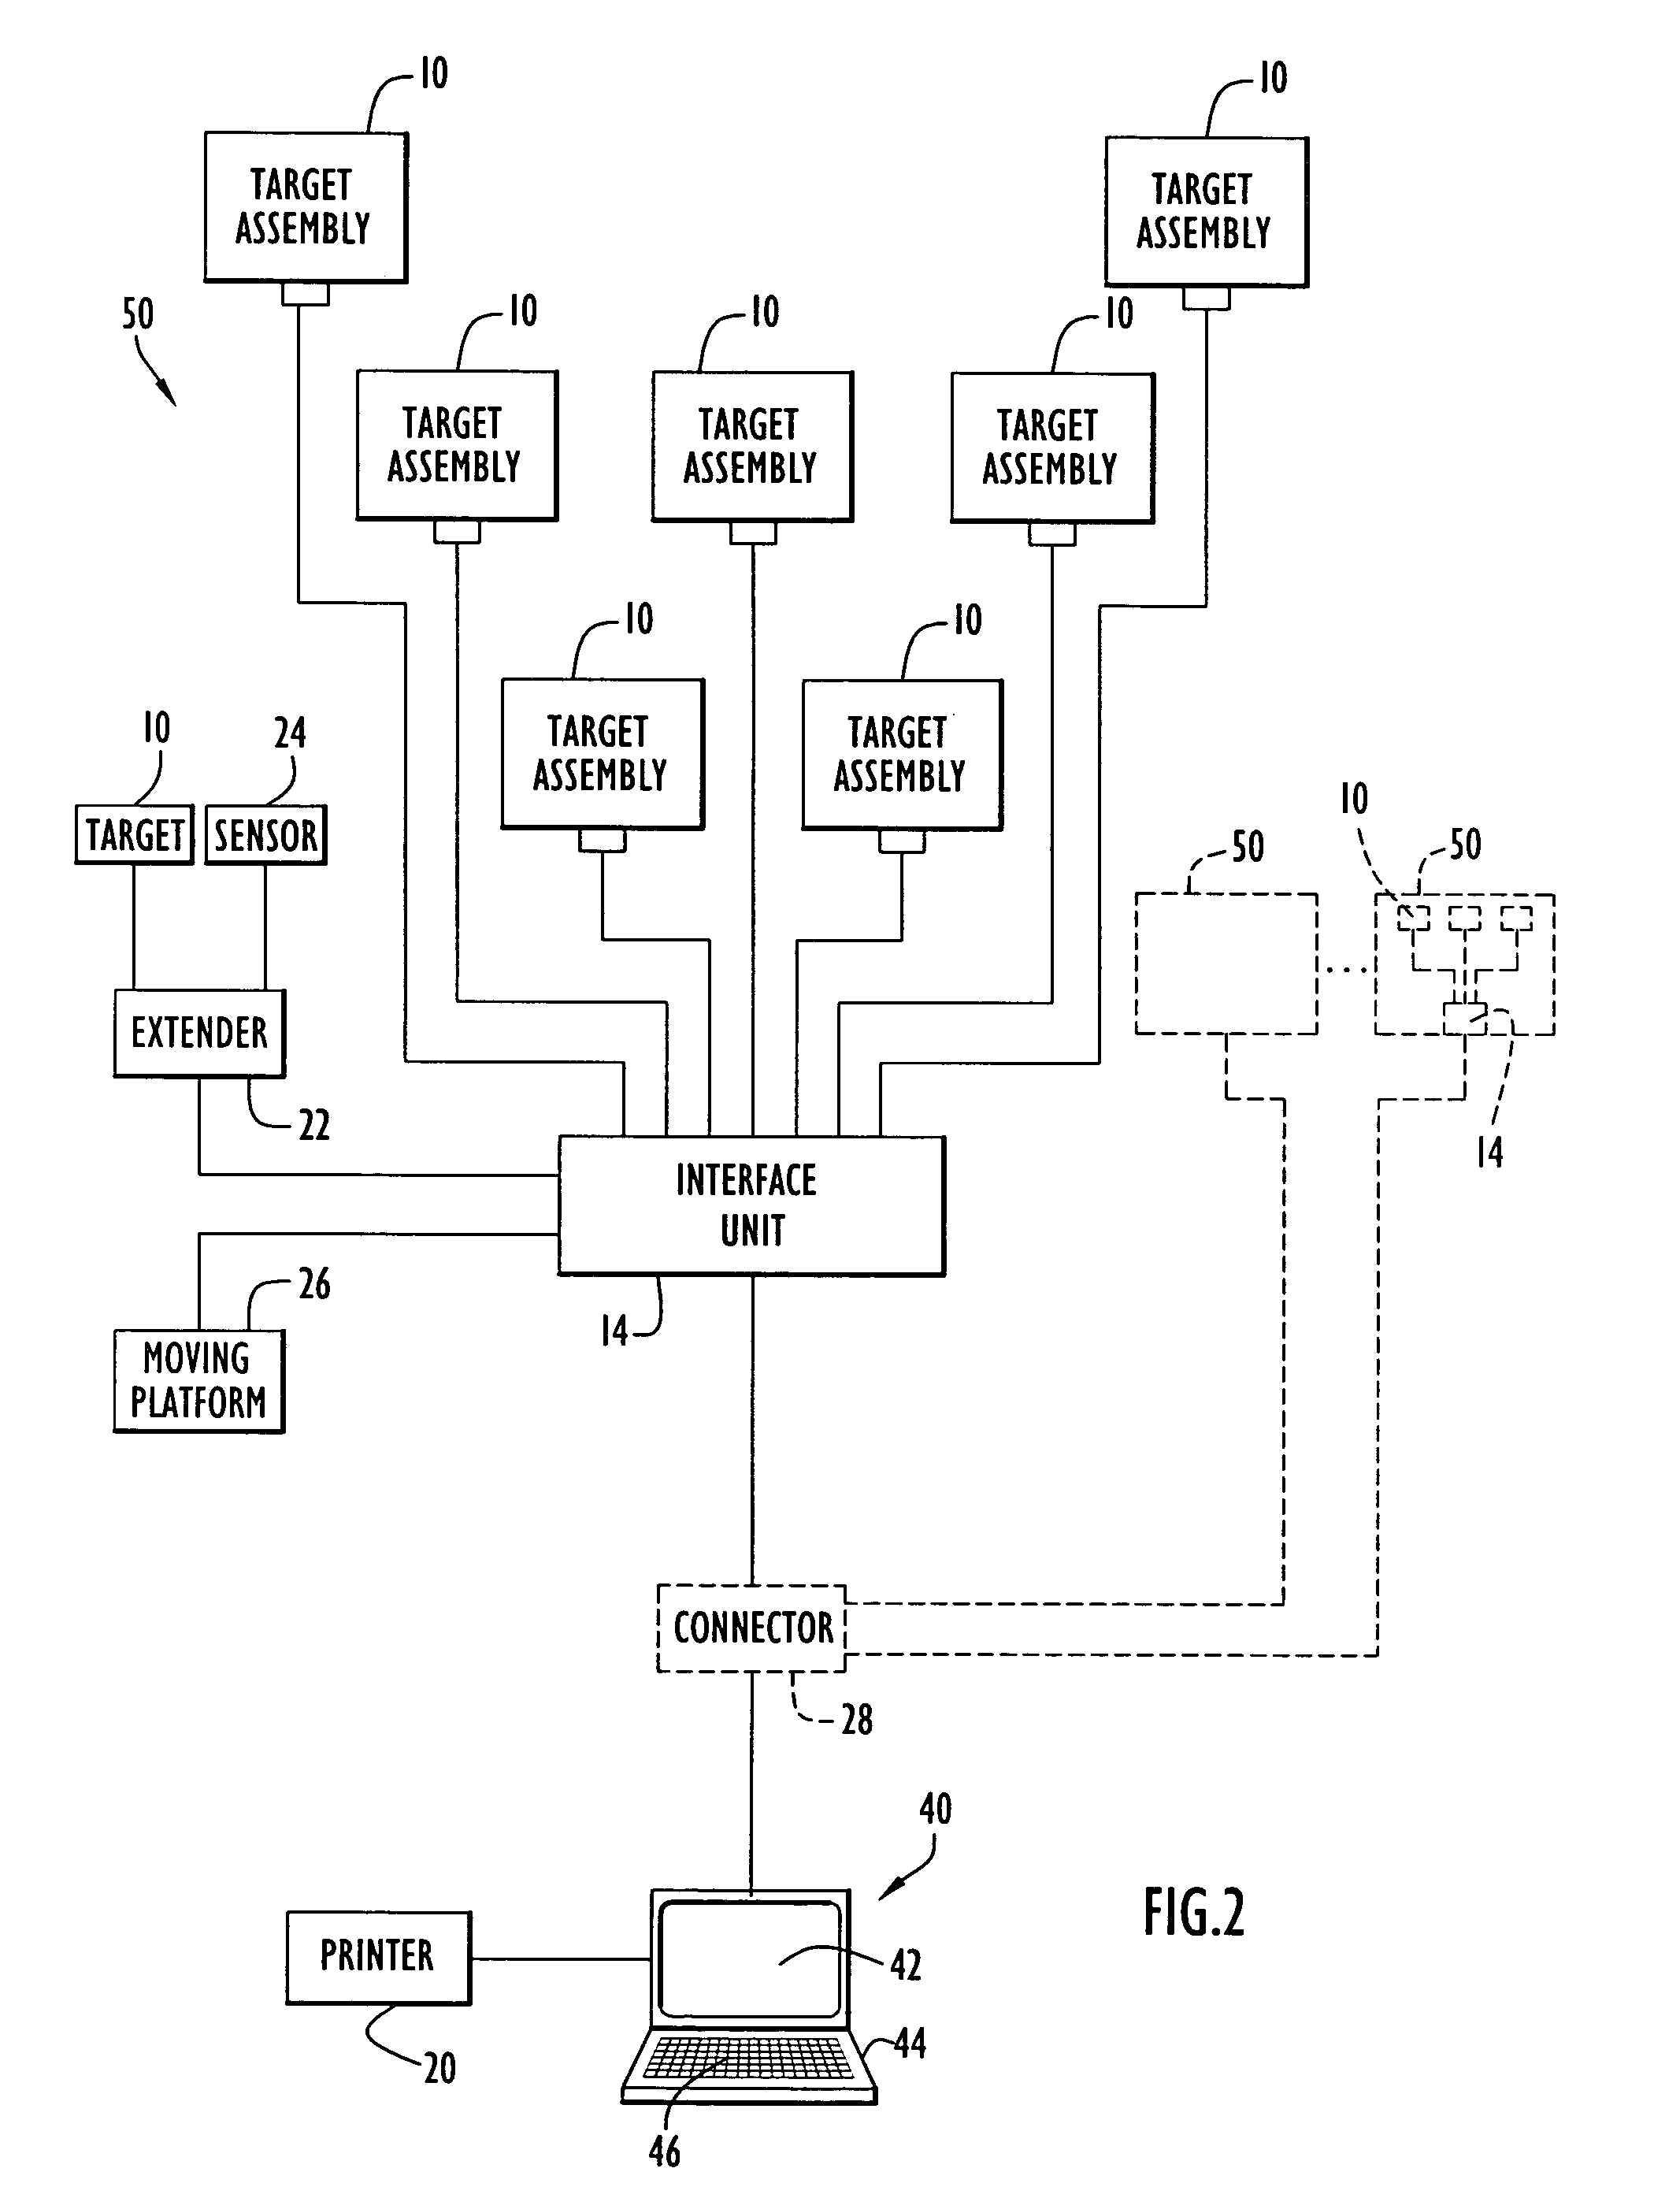 Firearm laser training system and method employing various targets to simulate training scenarios